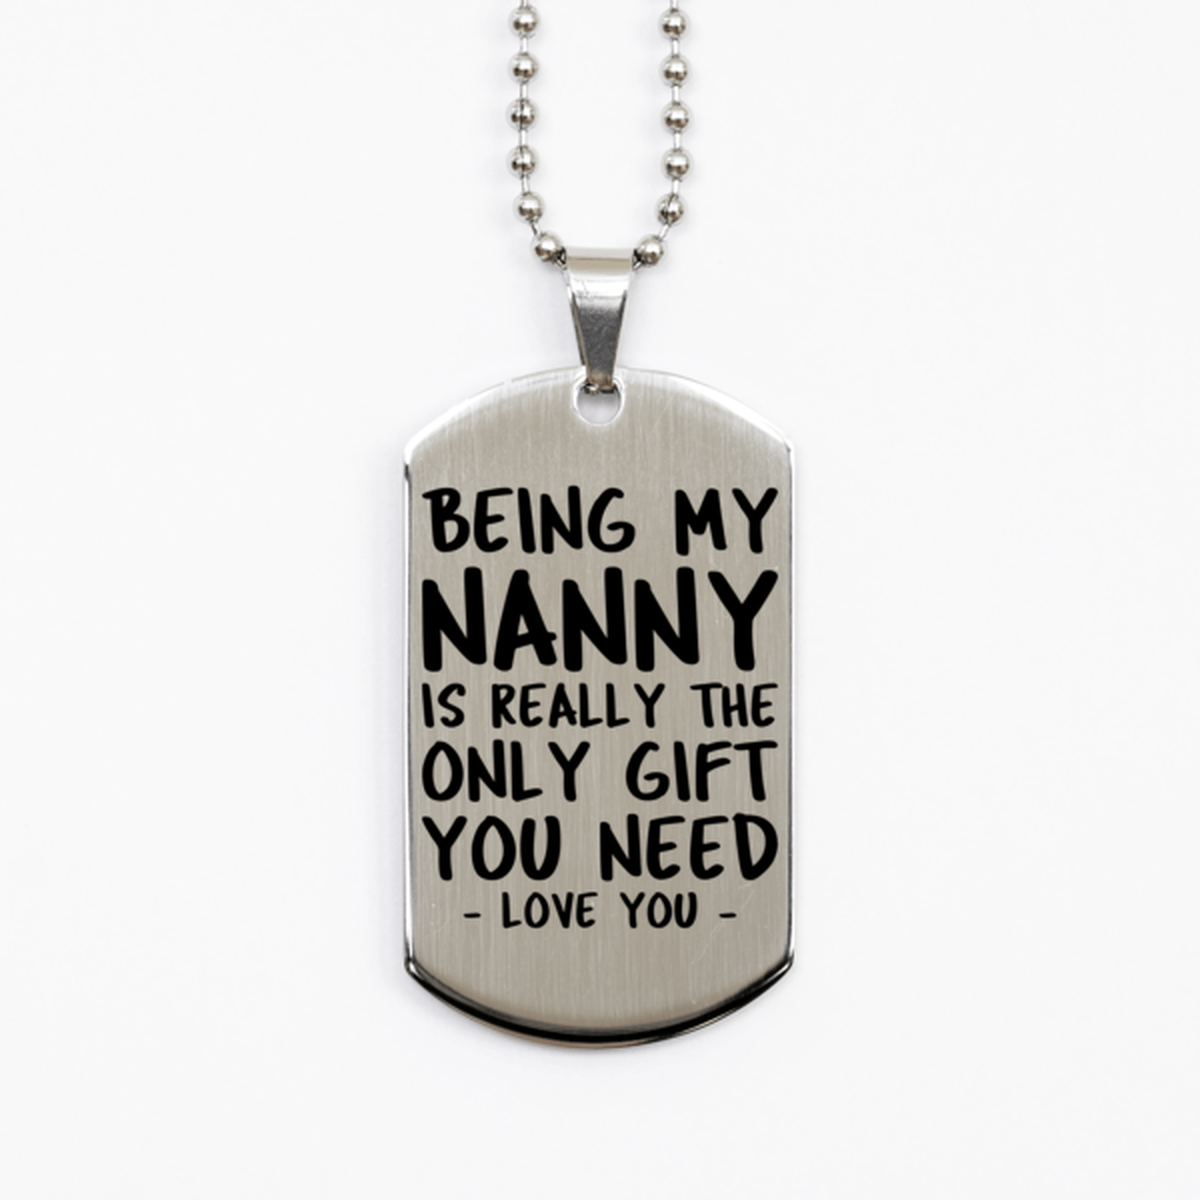 Funny Nanny Silver Dog Tag Necklace, Being My Nanny Is Really the Only Gift You Need, Best Birthday Gifts for Nanny